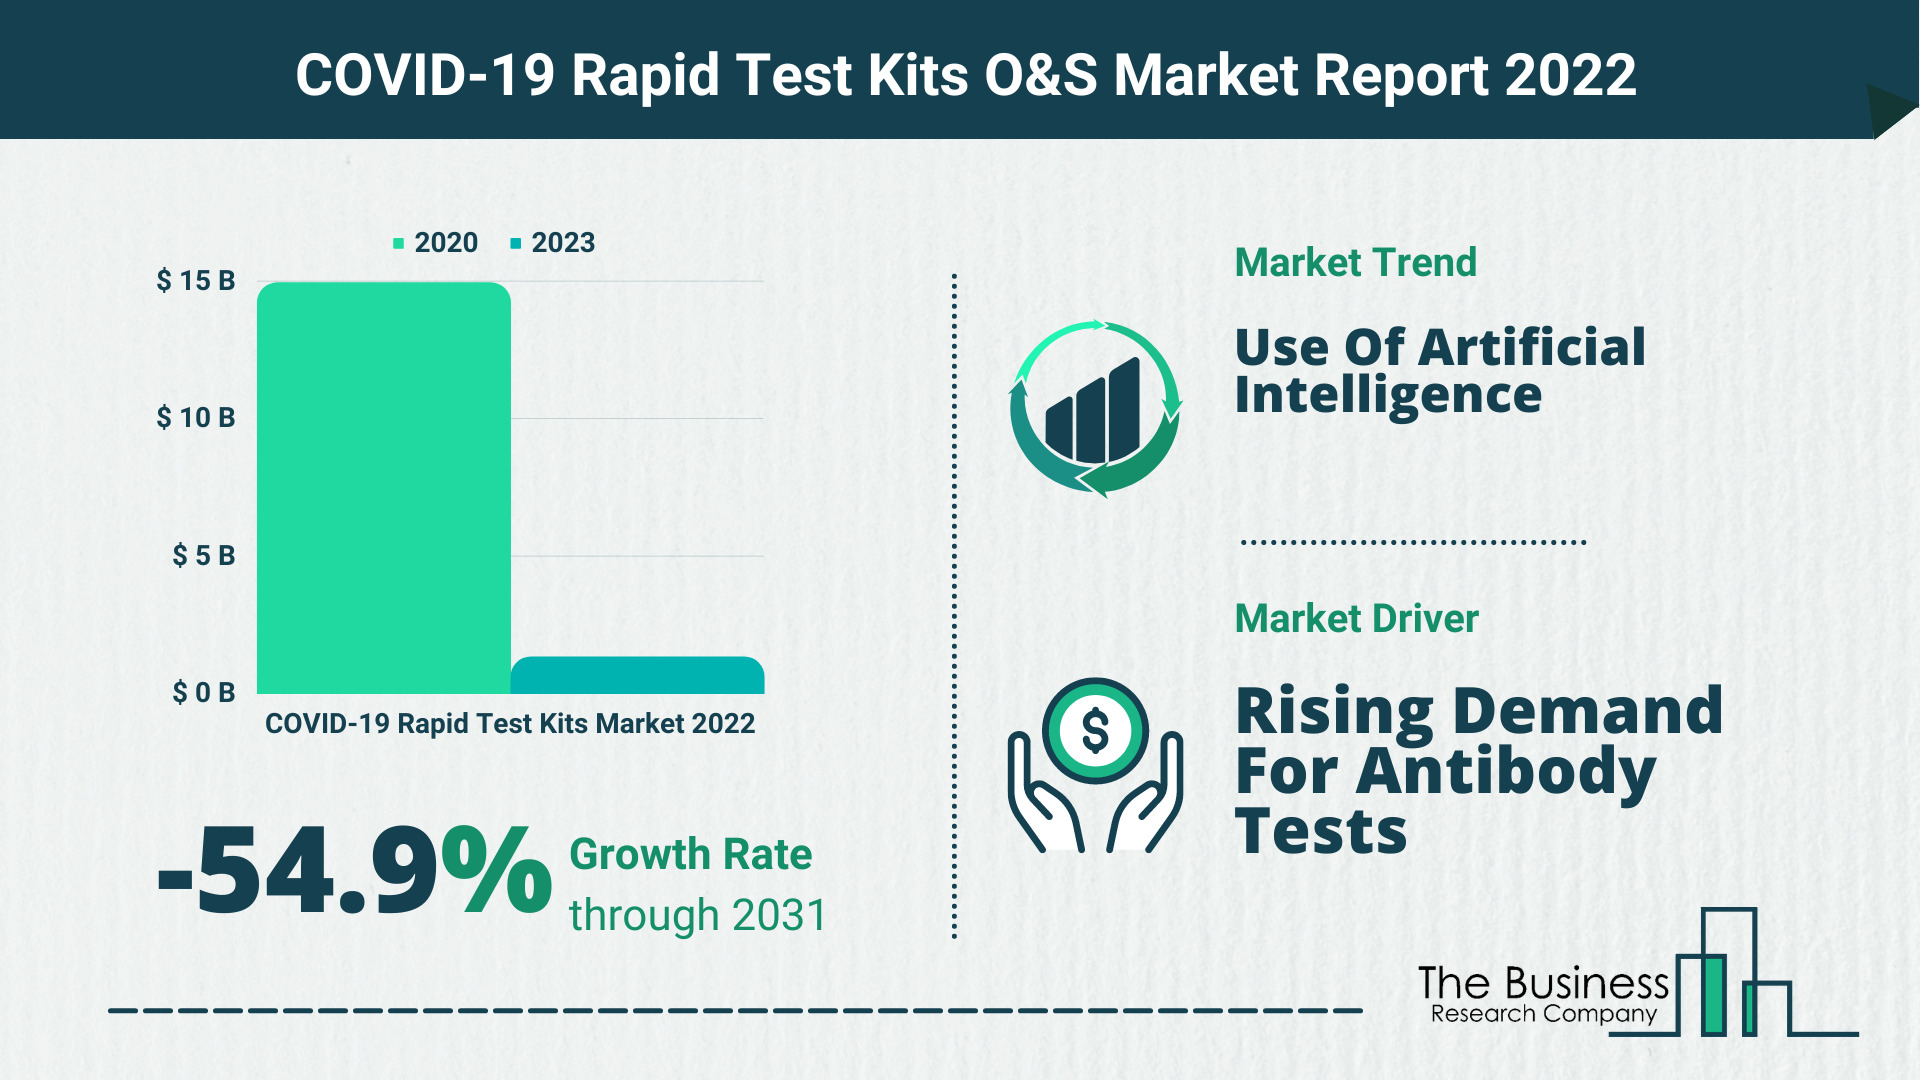 The COVID-19 Rapid Test Kits Market Forecast Until 2030 – Opportunities And Strategies